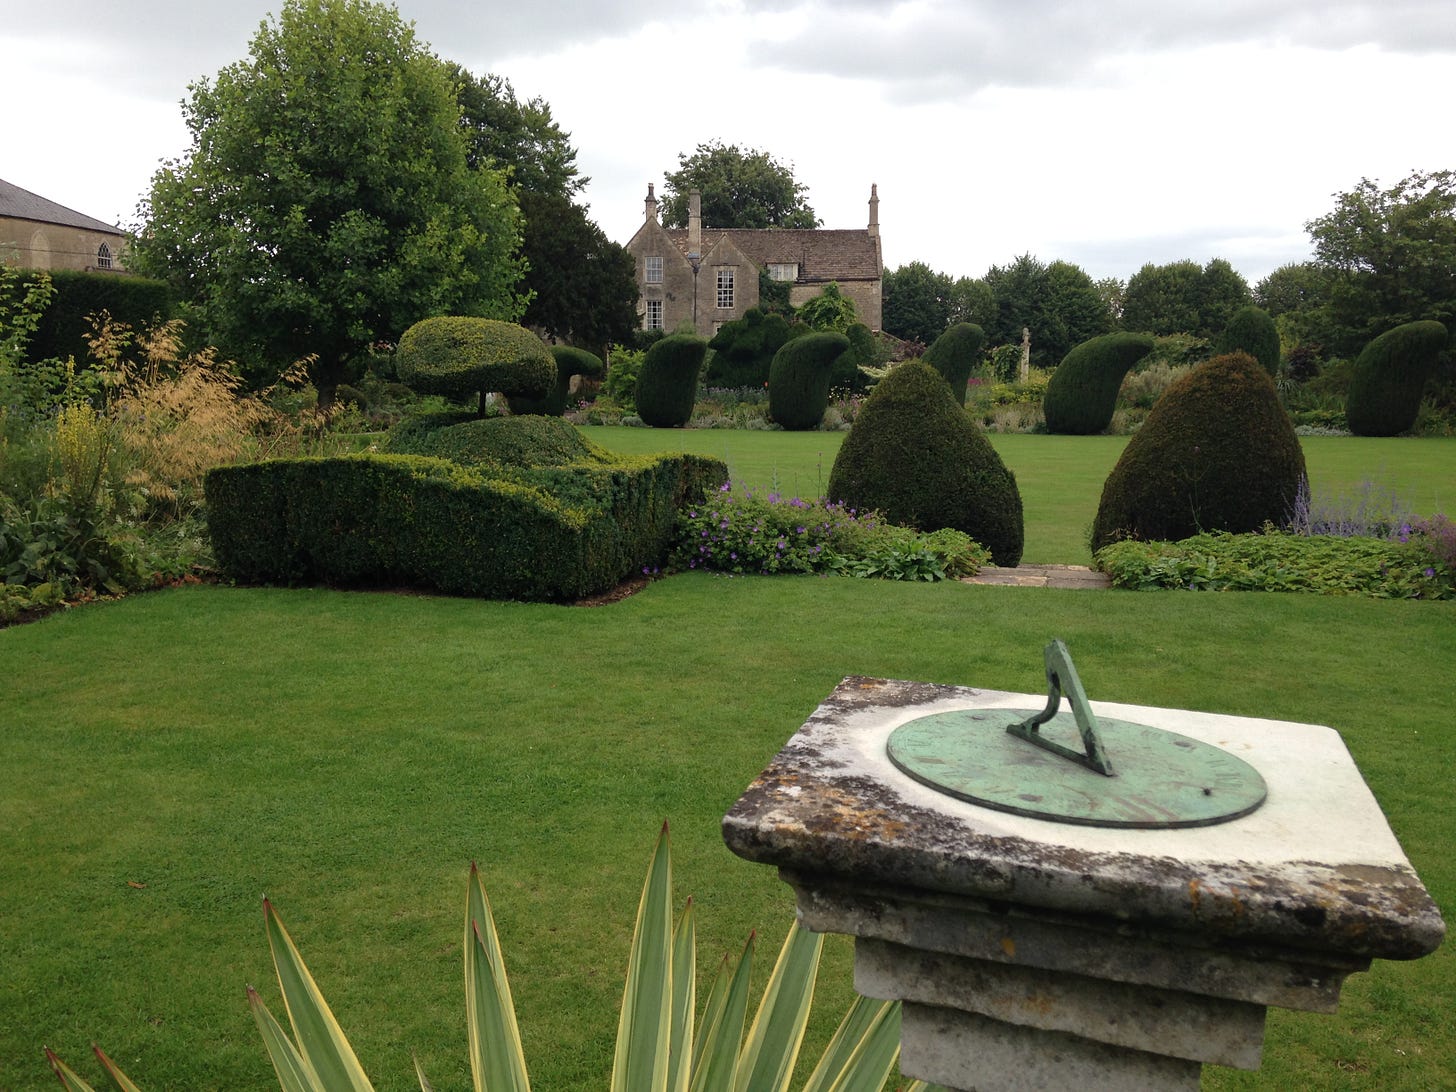 No one knows who invented the sundial. This one is located in The Courts Gardens, Holt, Wiltshire -  a National Trust property. Image: Roland’s Travels